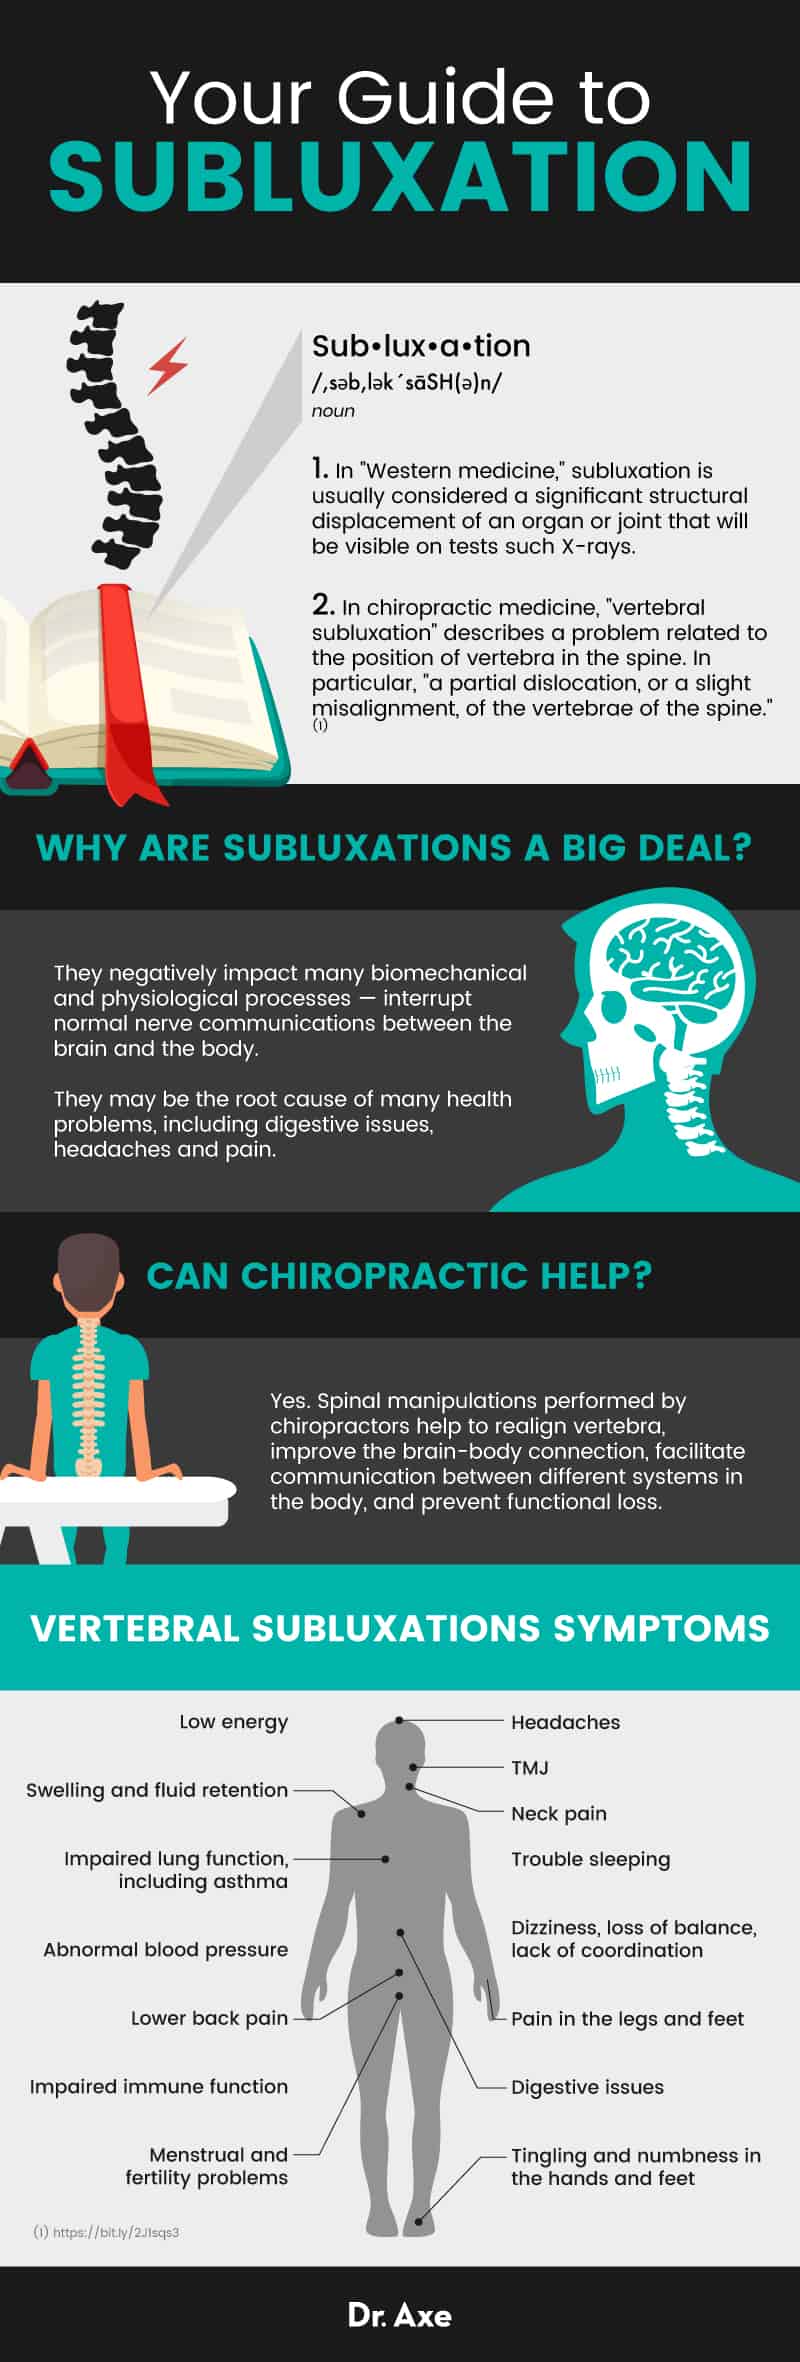 What is subluxation? - Dr. Axe